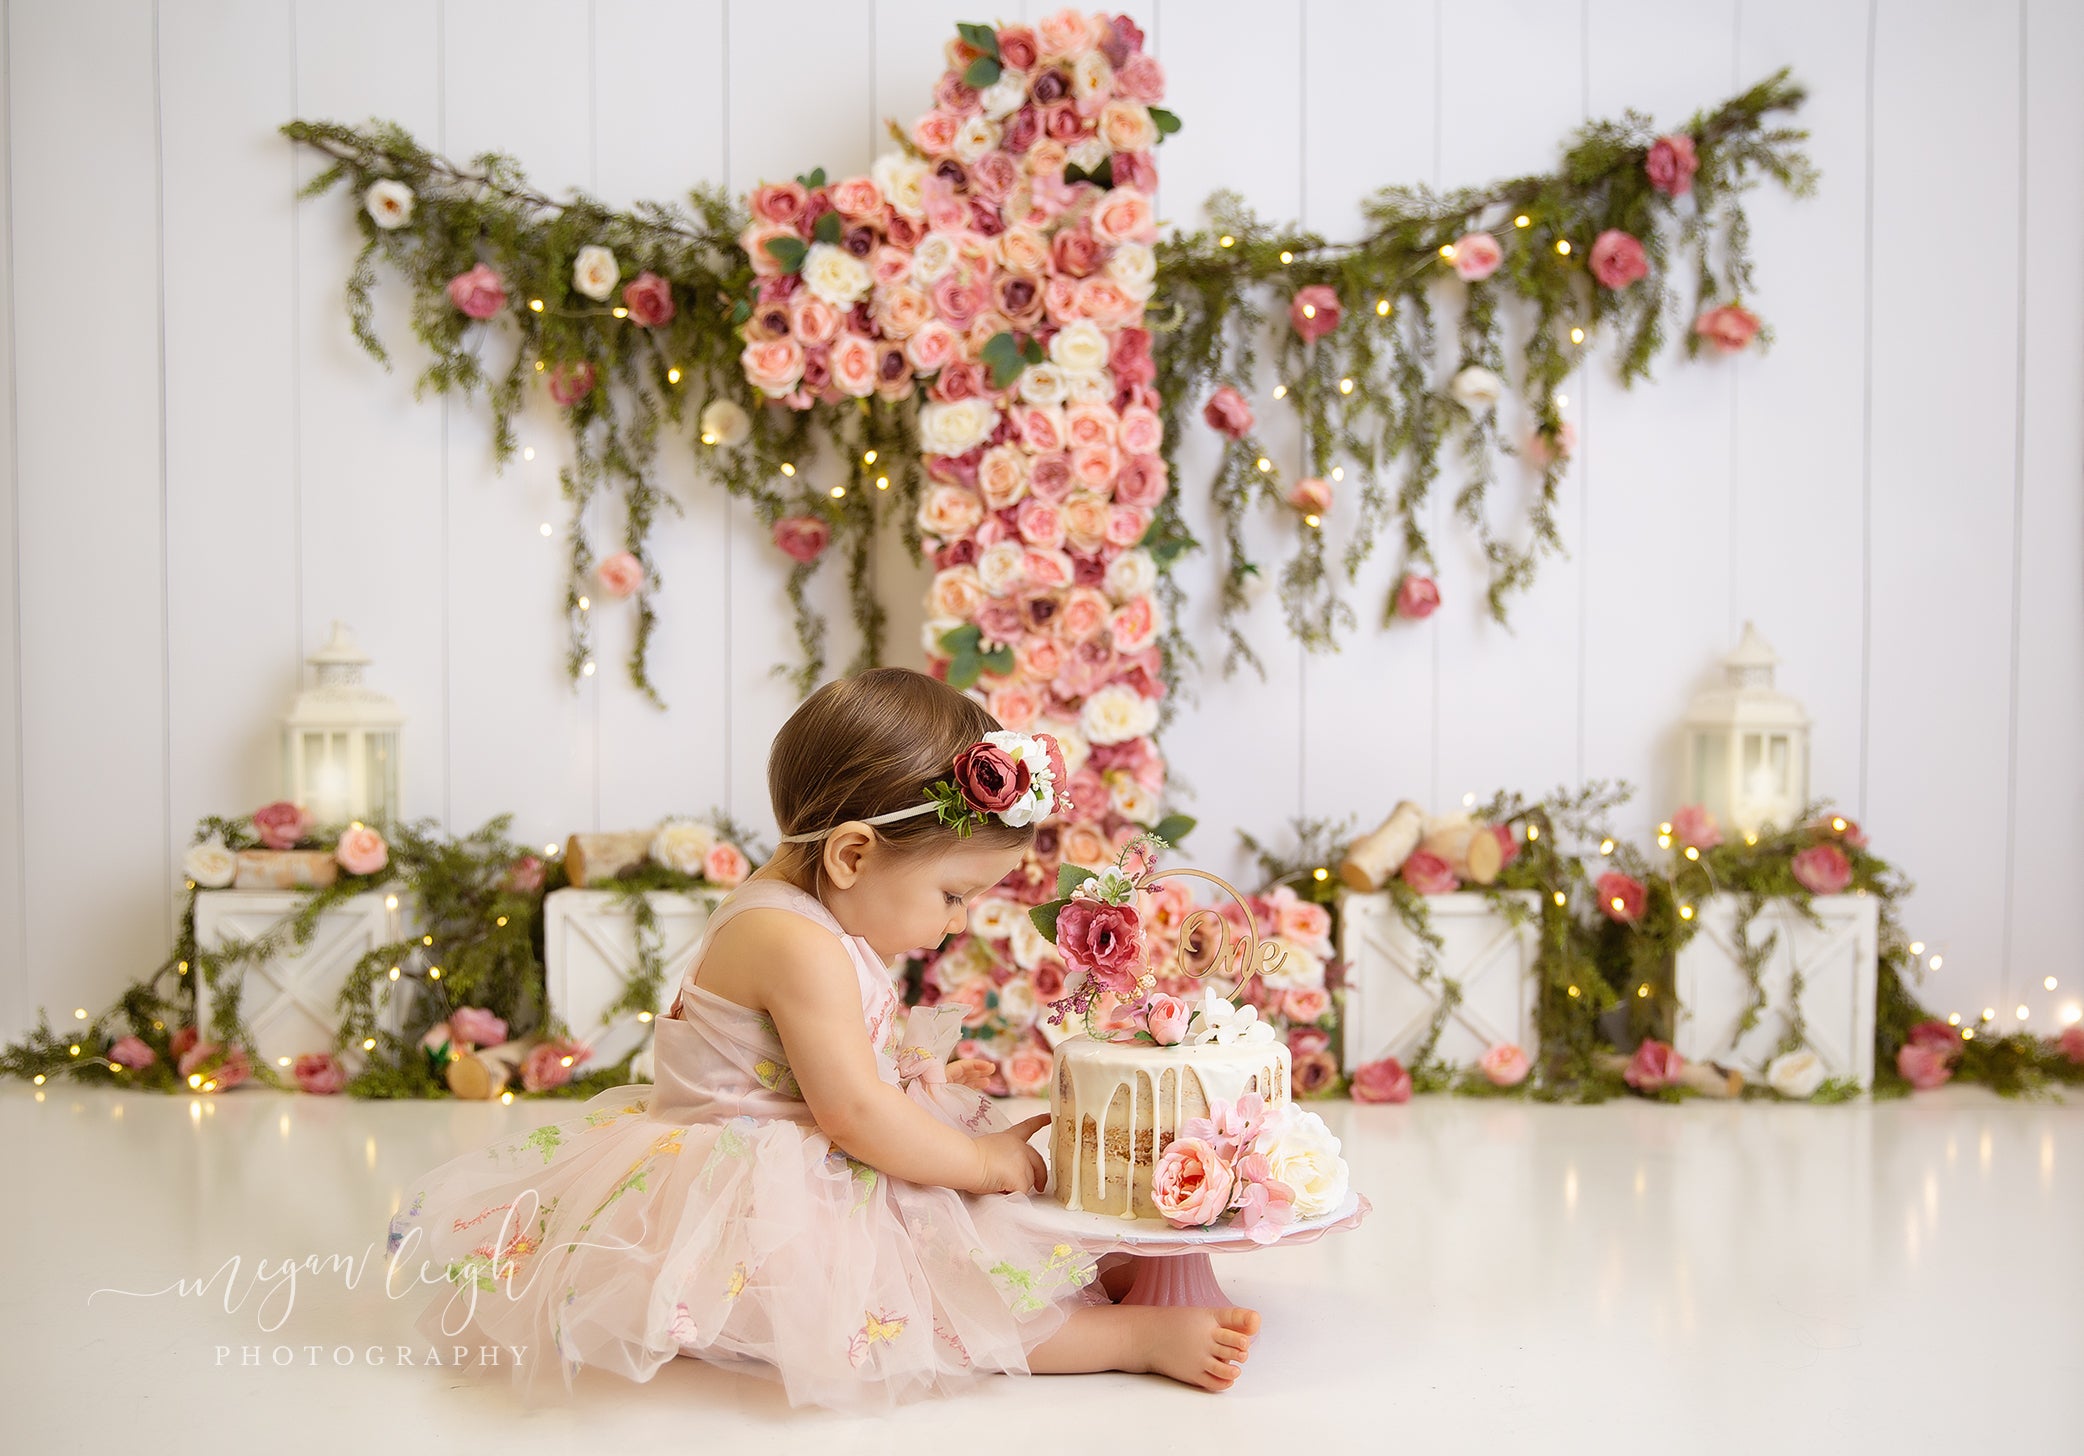 Kate Spring Flower 1st Birthday Backdrop Designed by Megan Leigh Photography